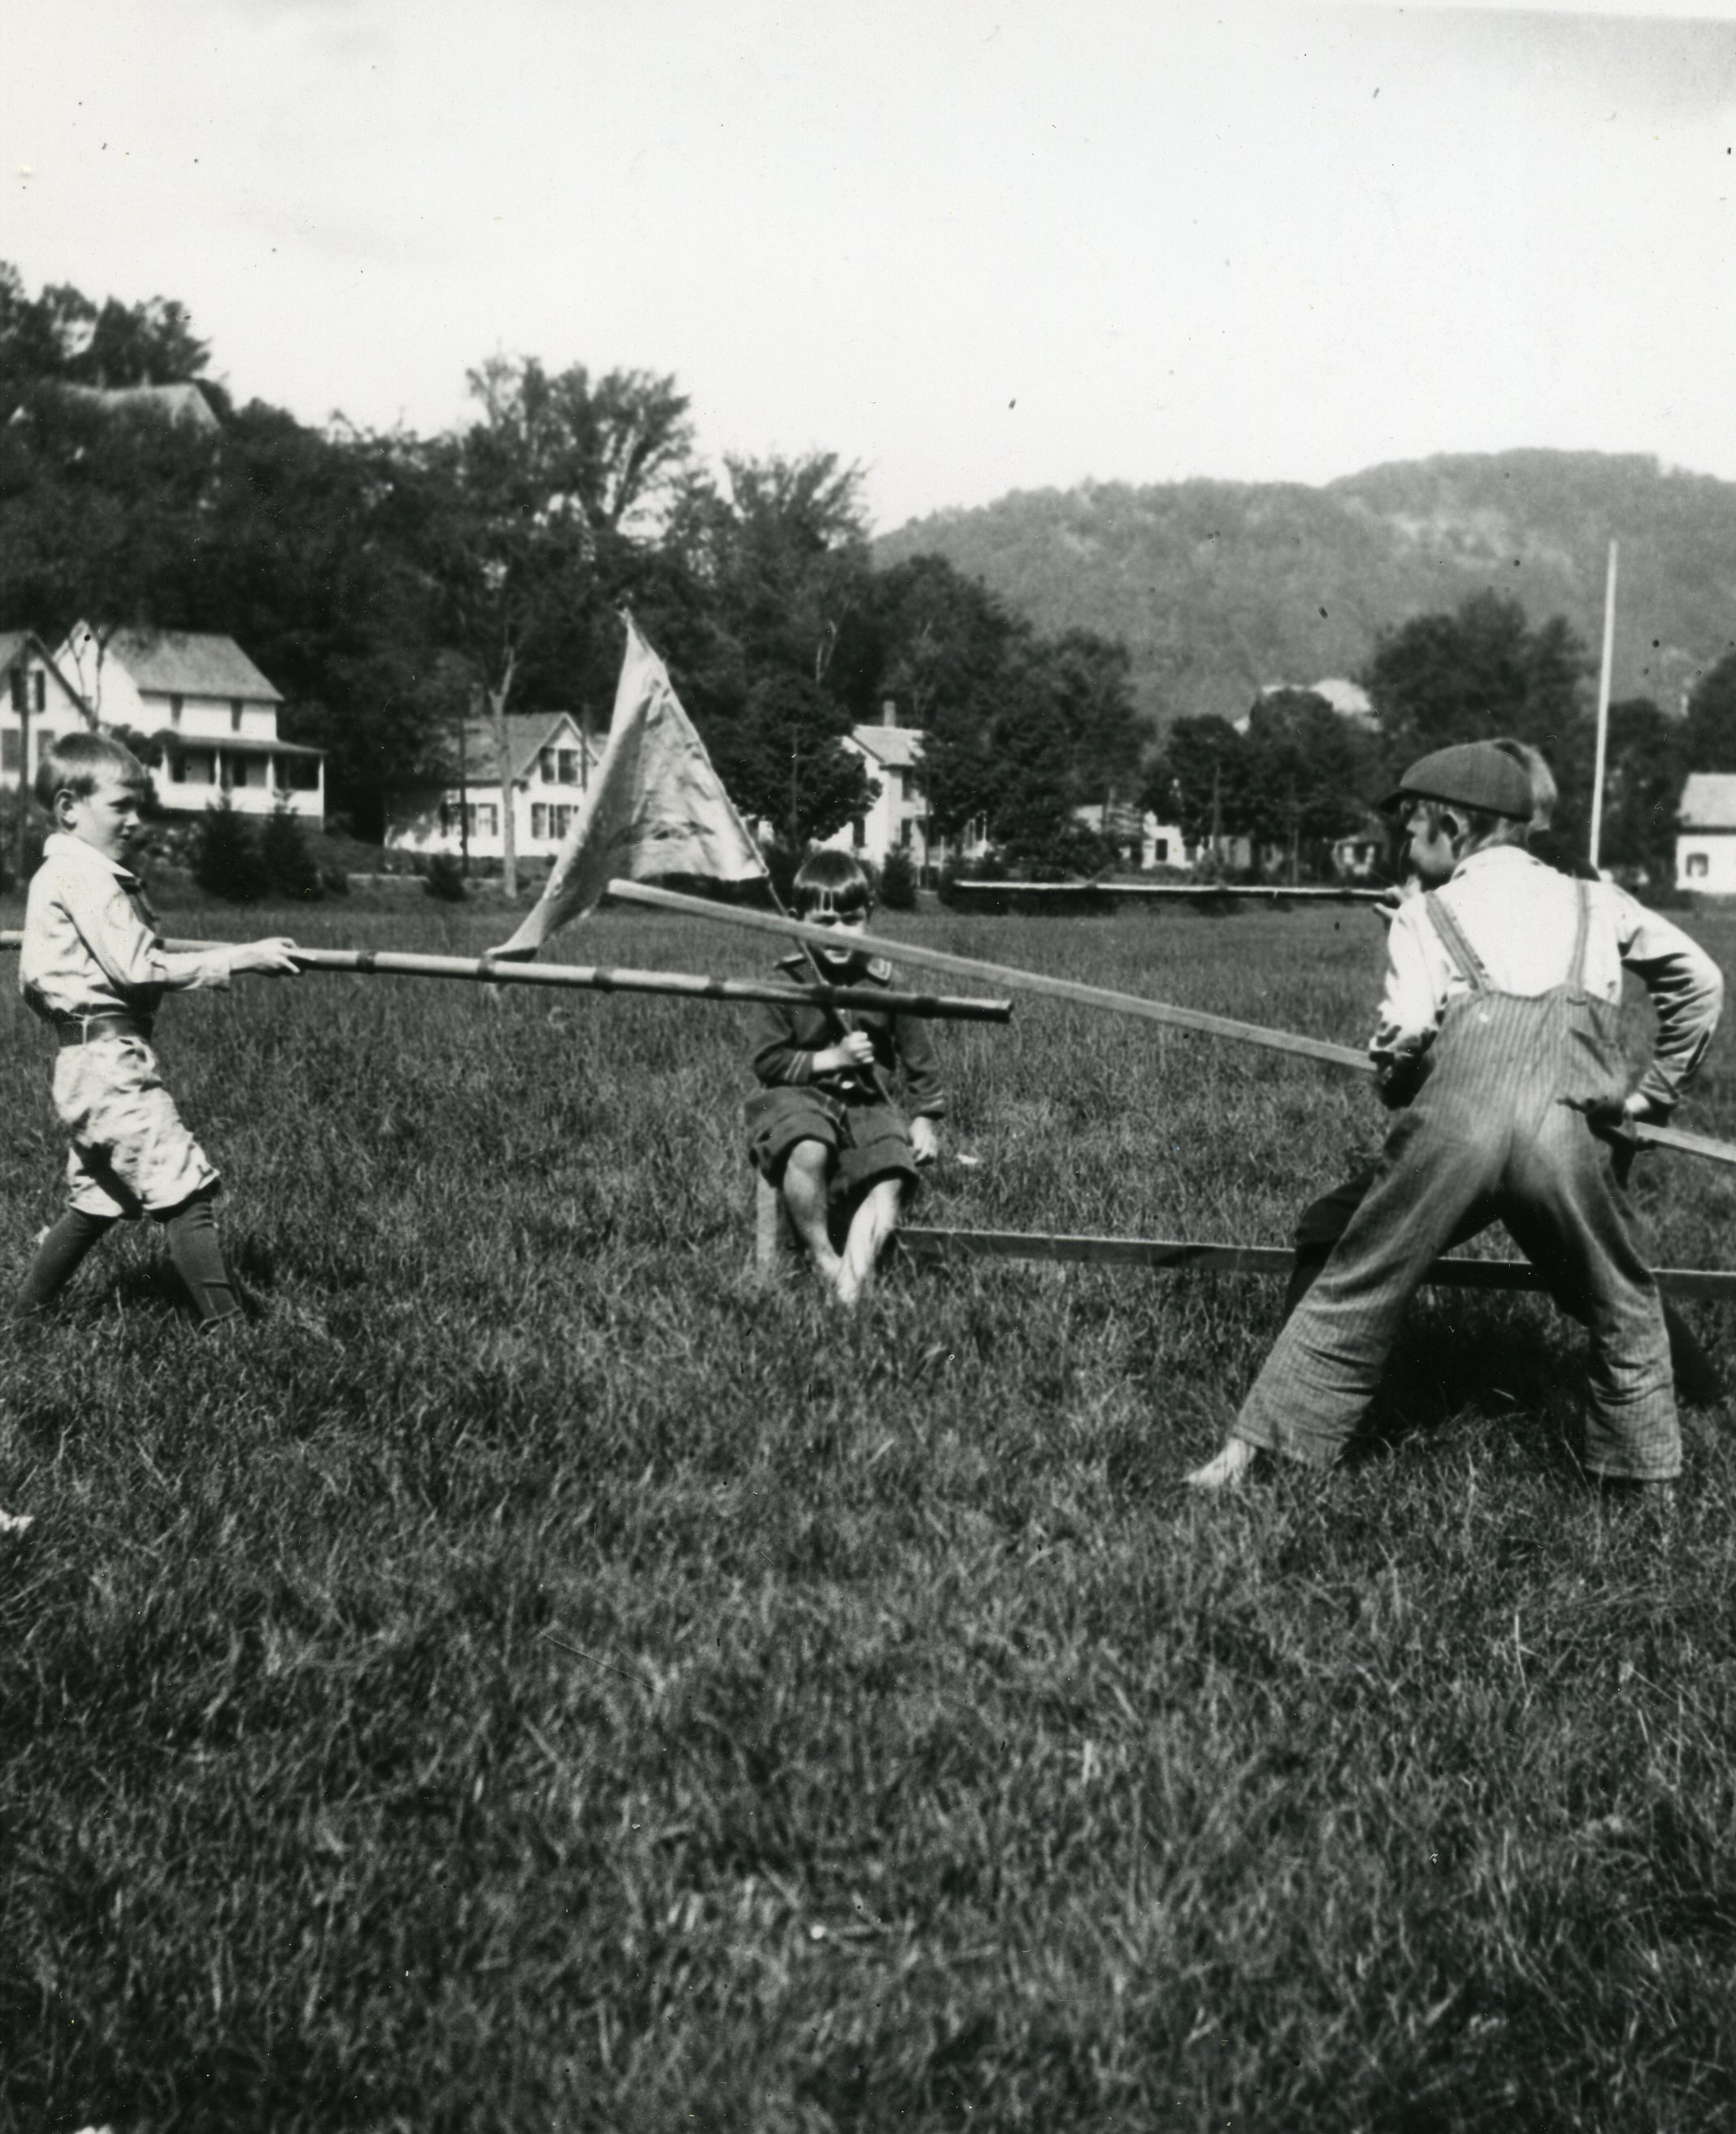 Children Jousting at Vail Field